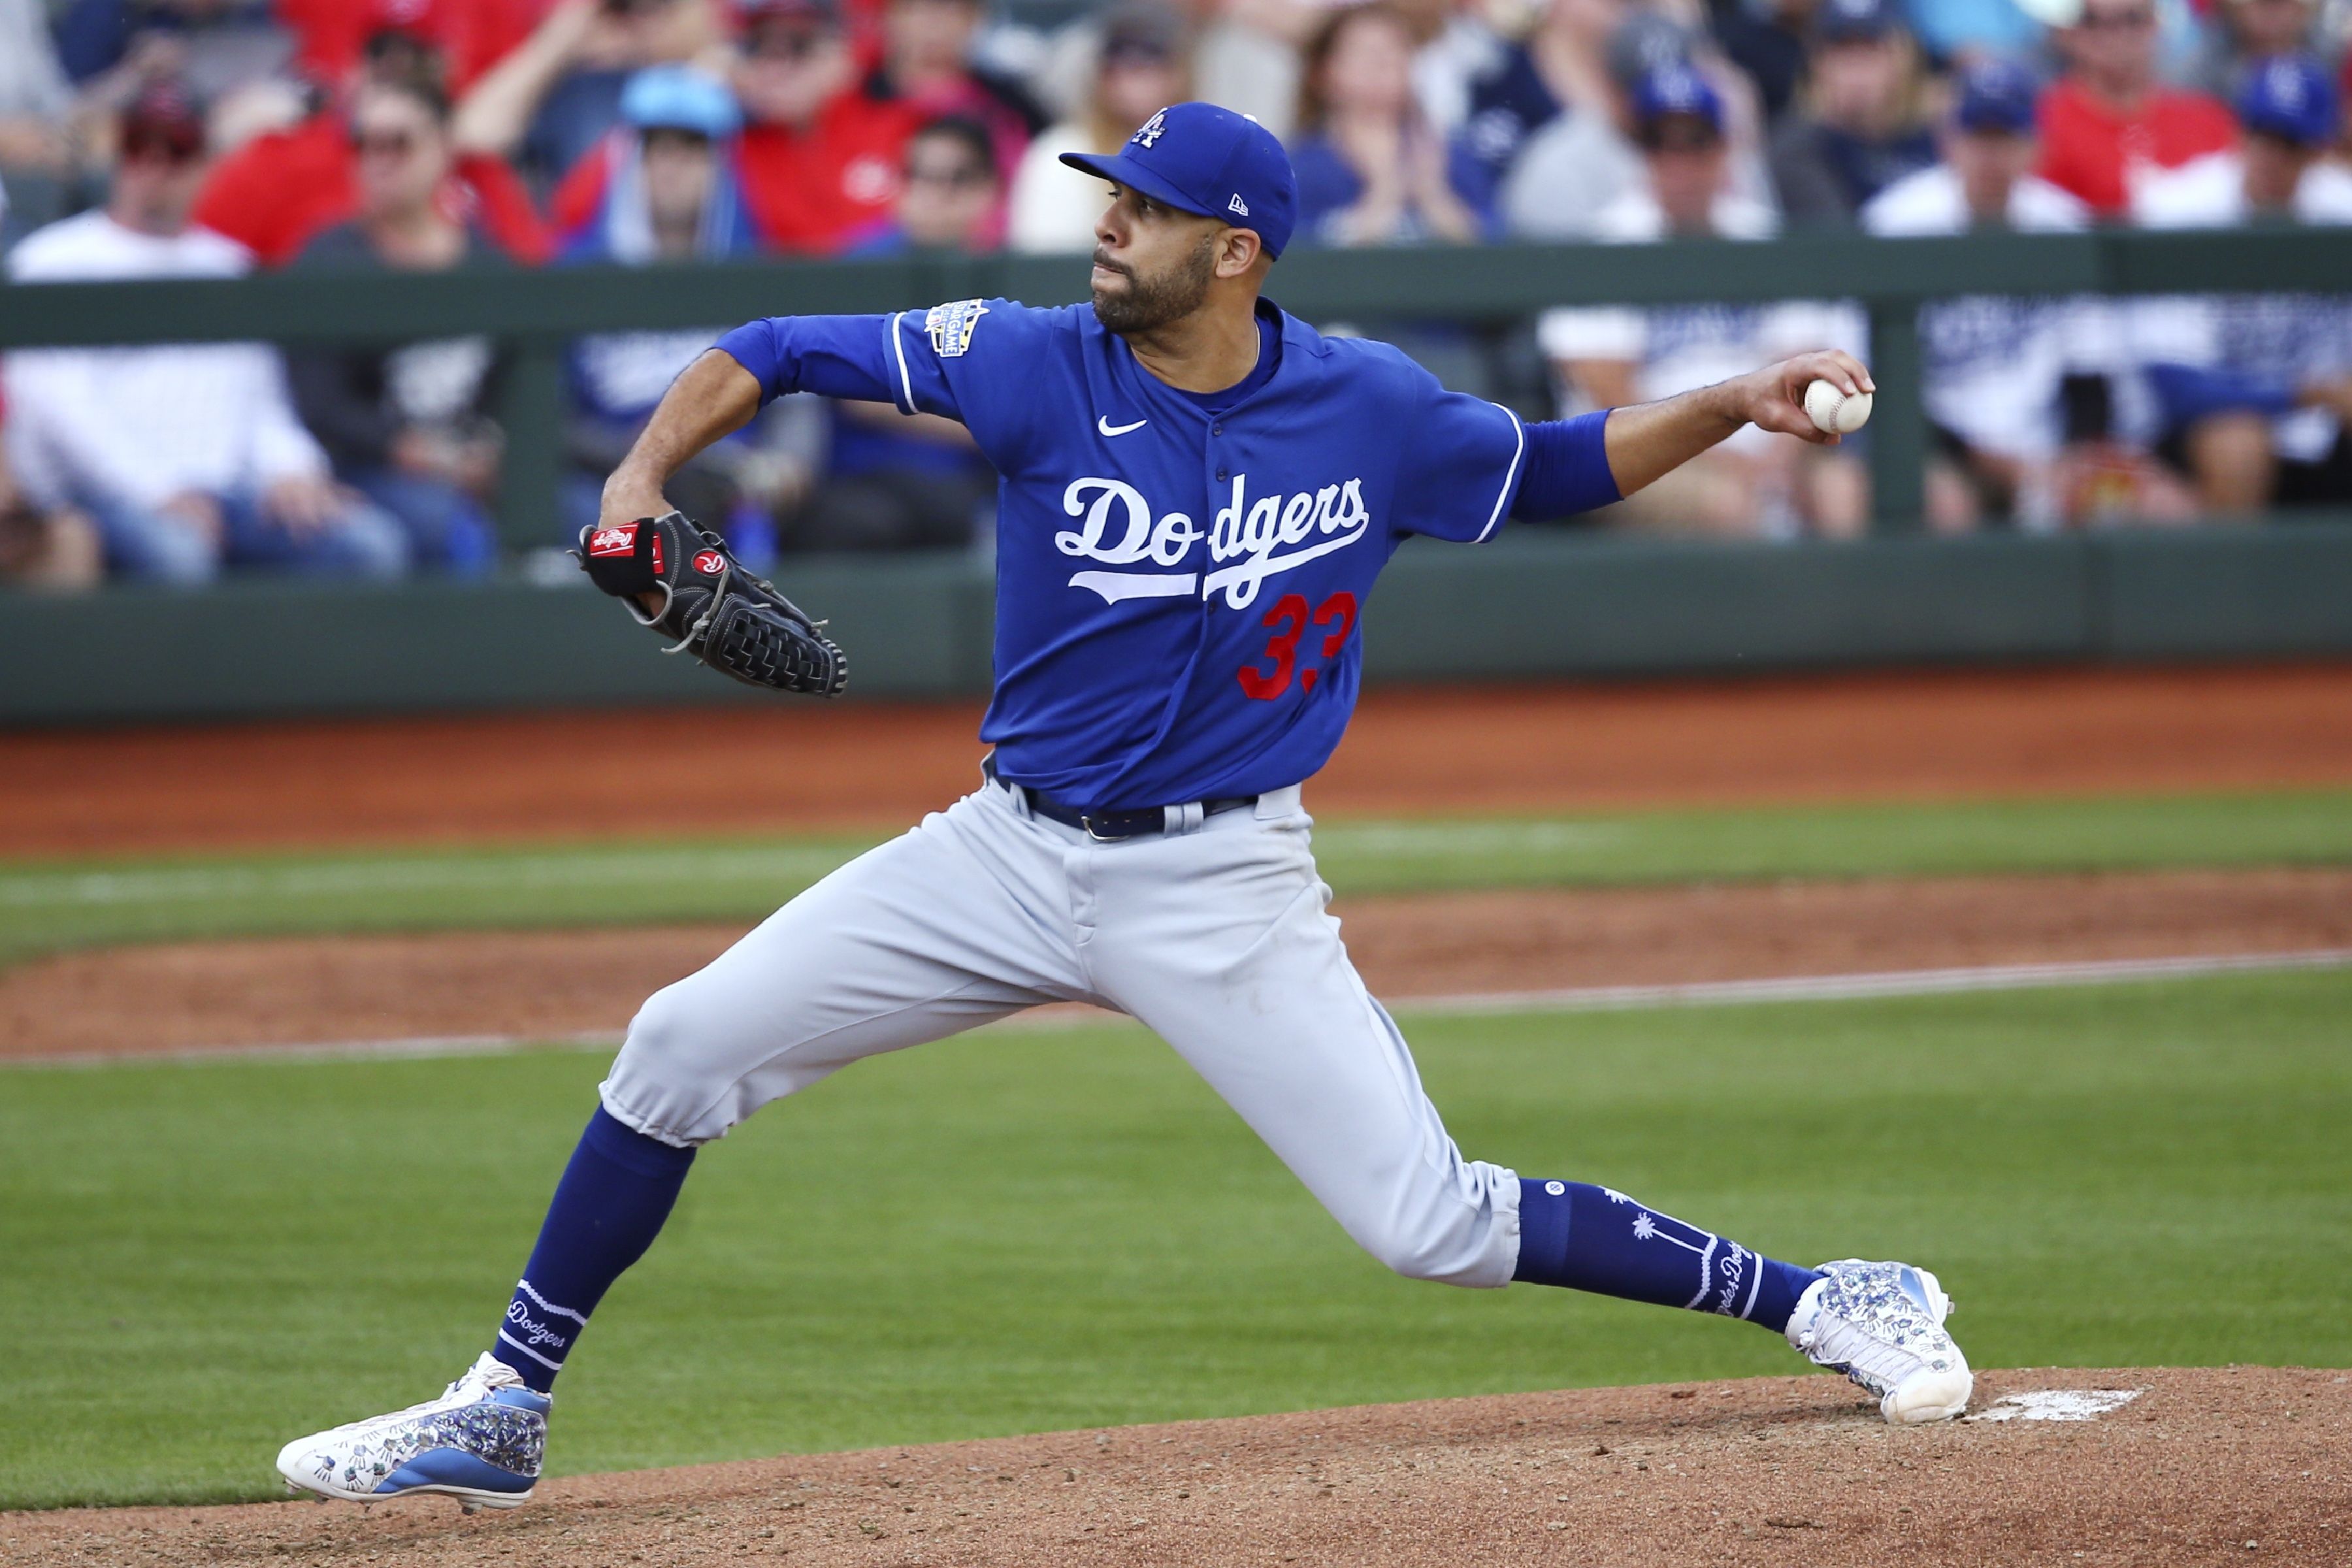 Signing David Price makes Red Sox instant favorites in American League